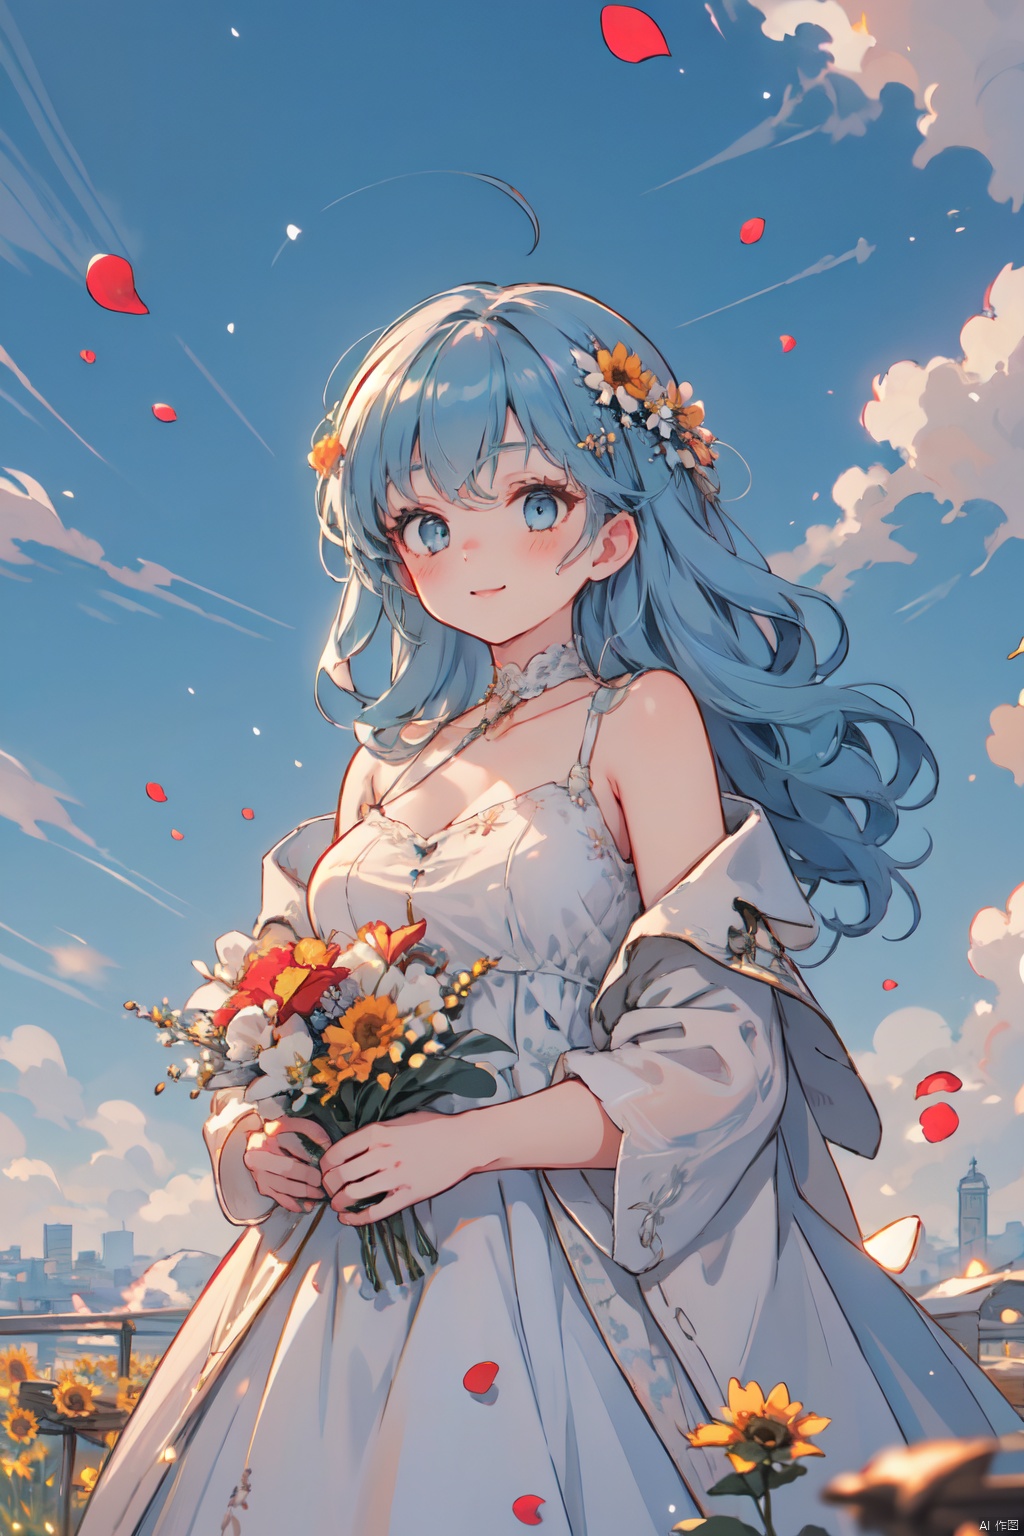  1 girl,flowers (innocent grey),Sky blue hair,standing,1girl, bangs, blue_sky, blush, bouquet, breasts, city, cityscape, cloud, cloudy_sky, collarbone, confetti, daisy, day, falling_petals, fence, ferris_wheel, field, flower, flower_field, hair_ornament, hairclip, holding, holding_flower, house, jacket, leaves_in_wind, long_hair, long_sleeves, looking_at_viewer, open_clothes, open_jacket, outdoors, petals, rose_petals, sky, skyline, skyscraper, smile, solo, sunflower, tower, upper_body, wind, windmill, yellow_flower, (wide shot, mid shot, panorama), blurry,Nebula, flowing skirts,（smoke）,Giant flowers, light master, (\shen ming shao nv\)